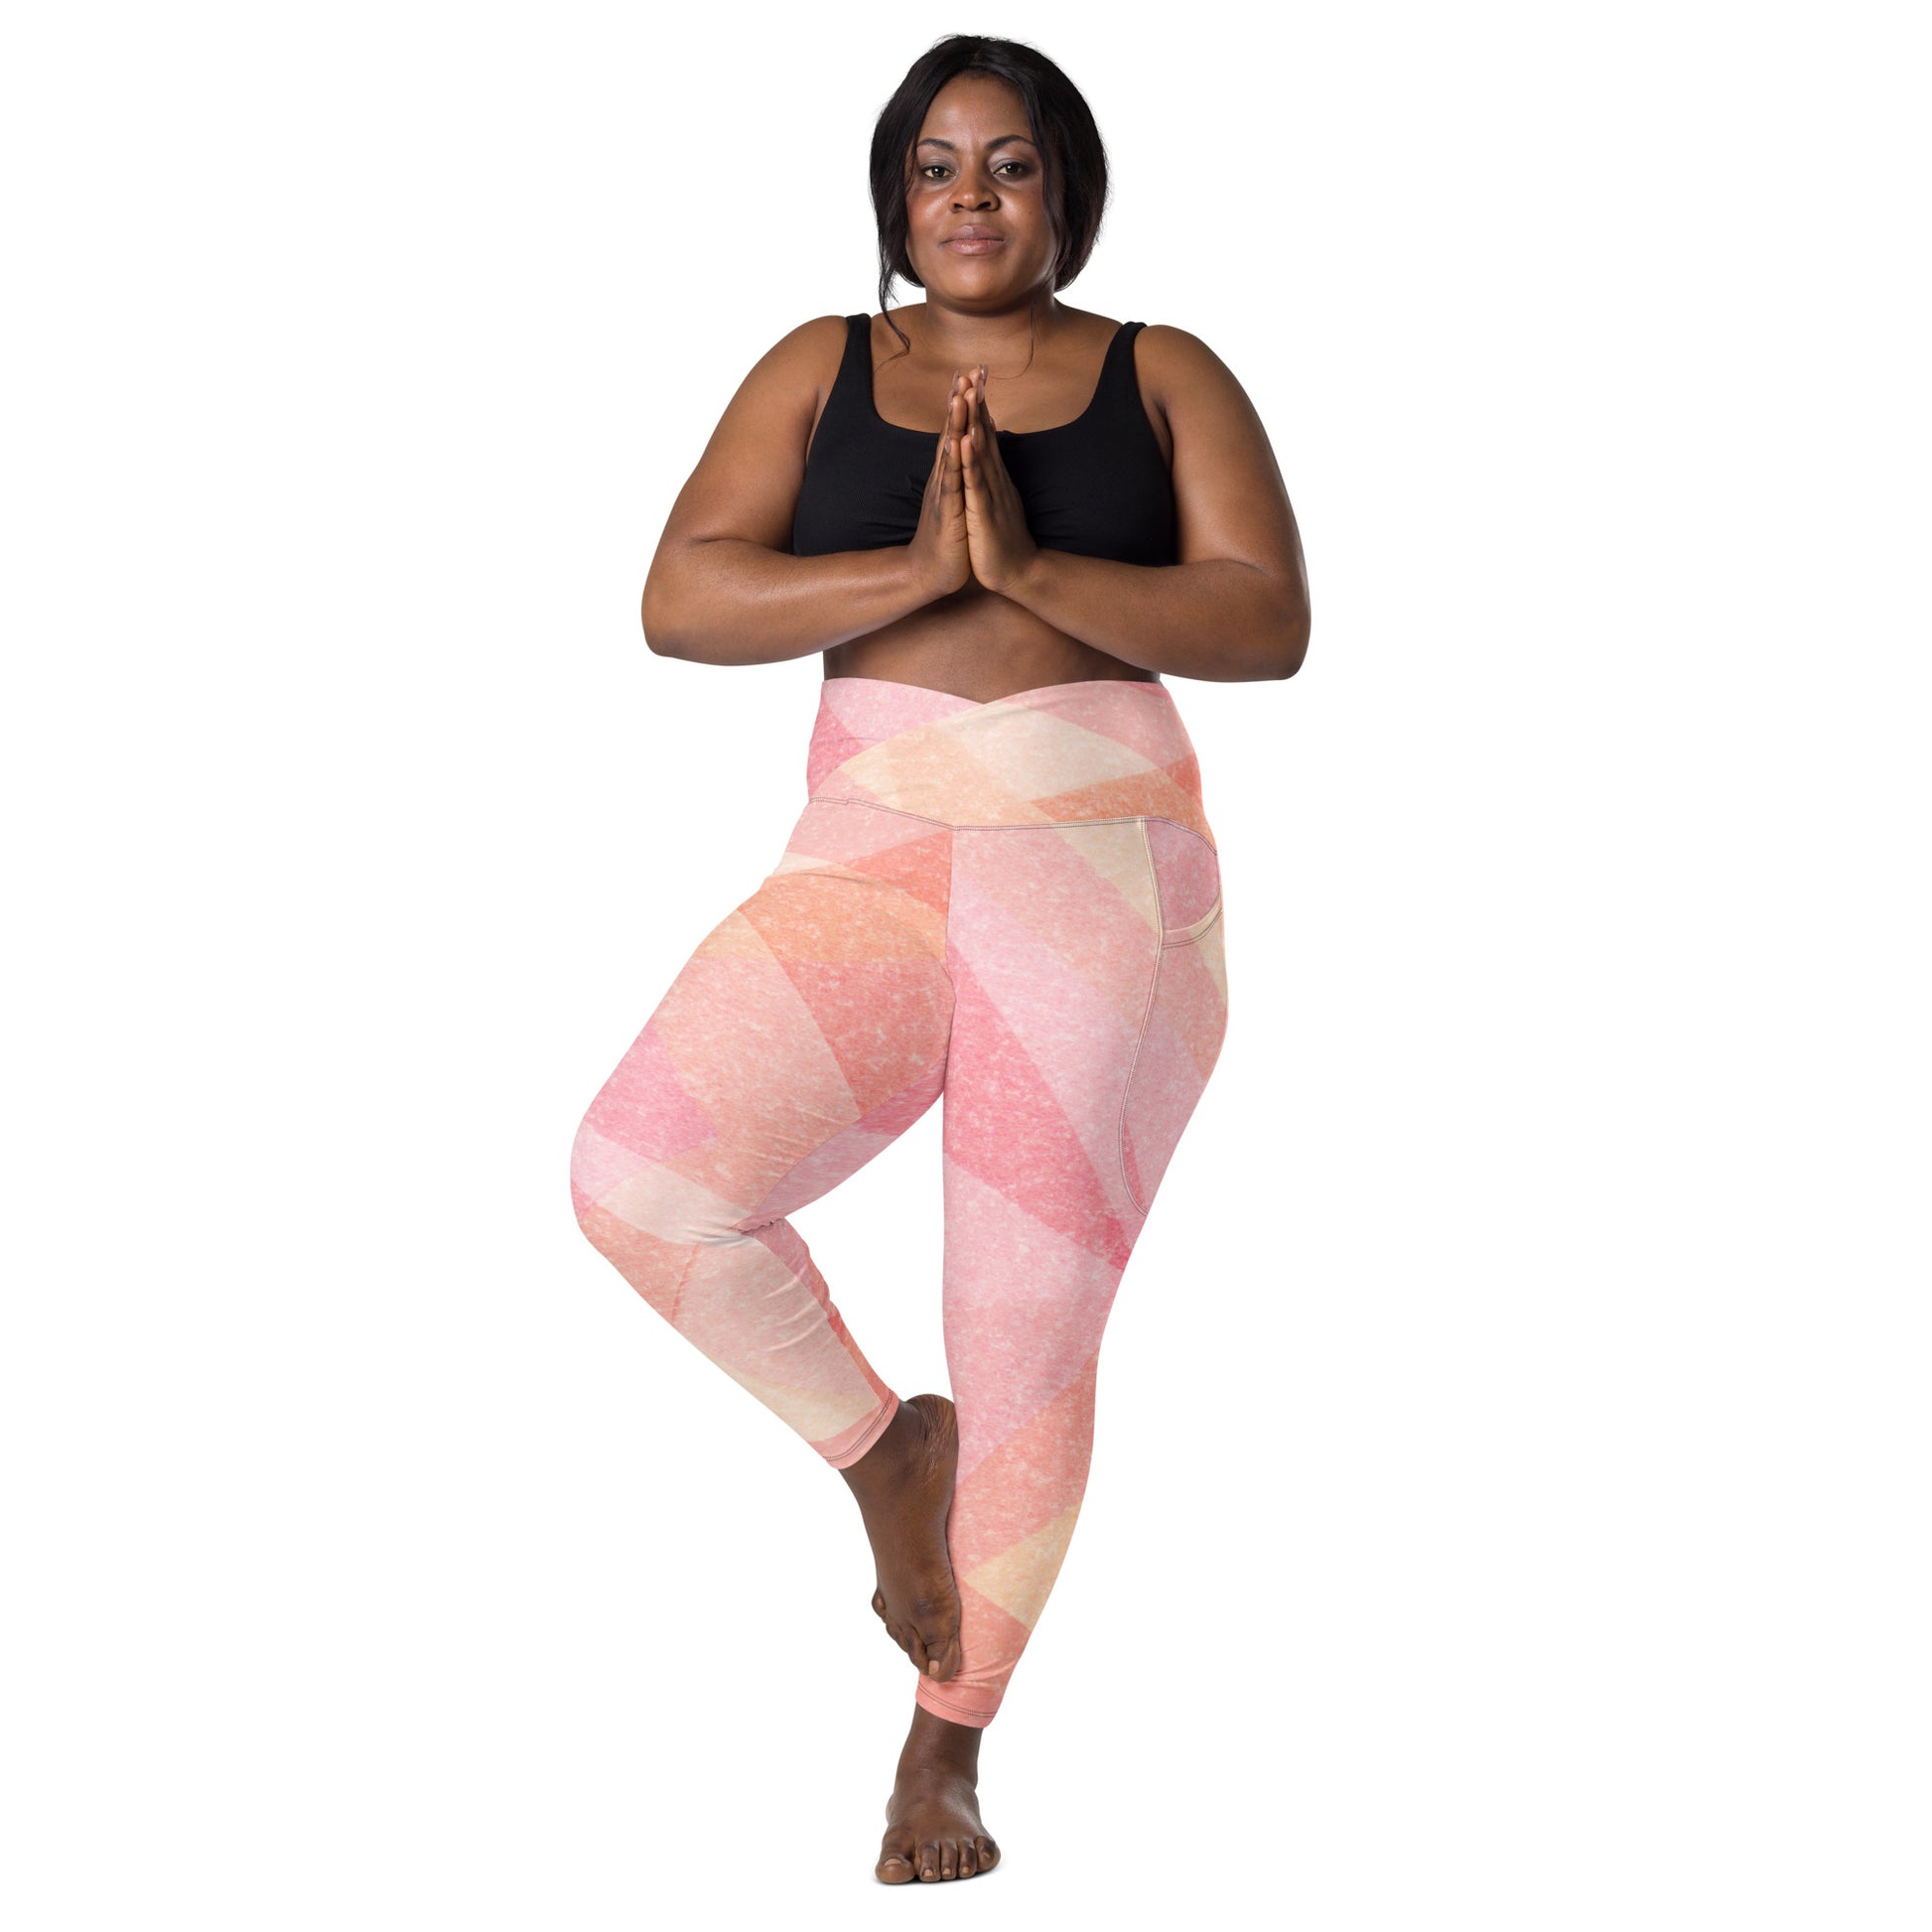 ActiveFuse Leggings by Jain  Stylish and Supportive Workout Tights – Jain  Yoga Ltd.